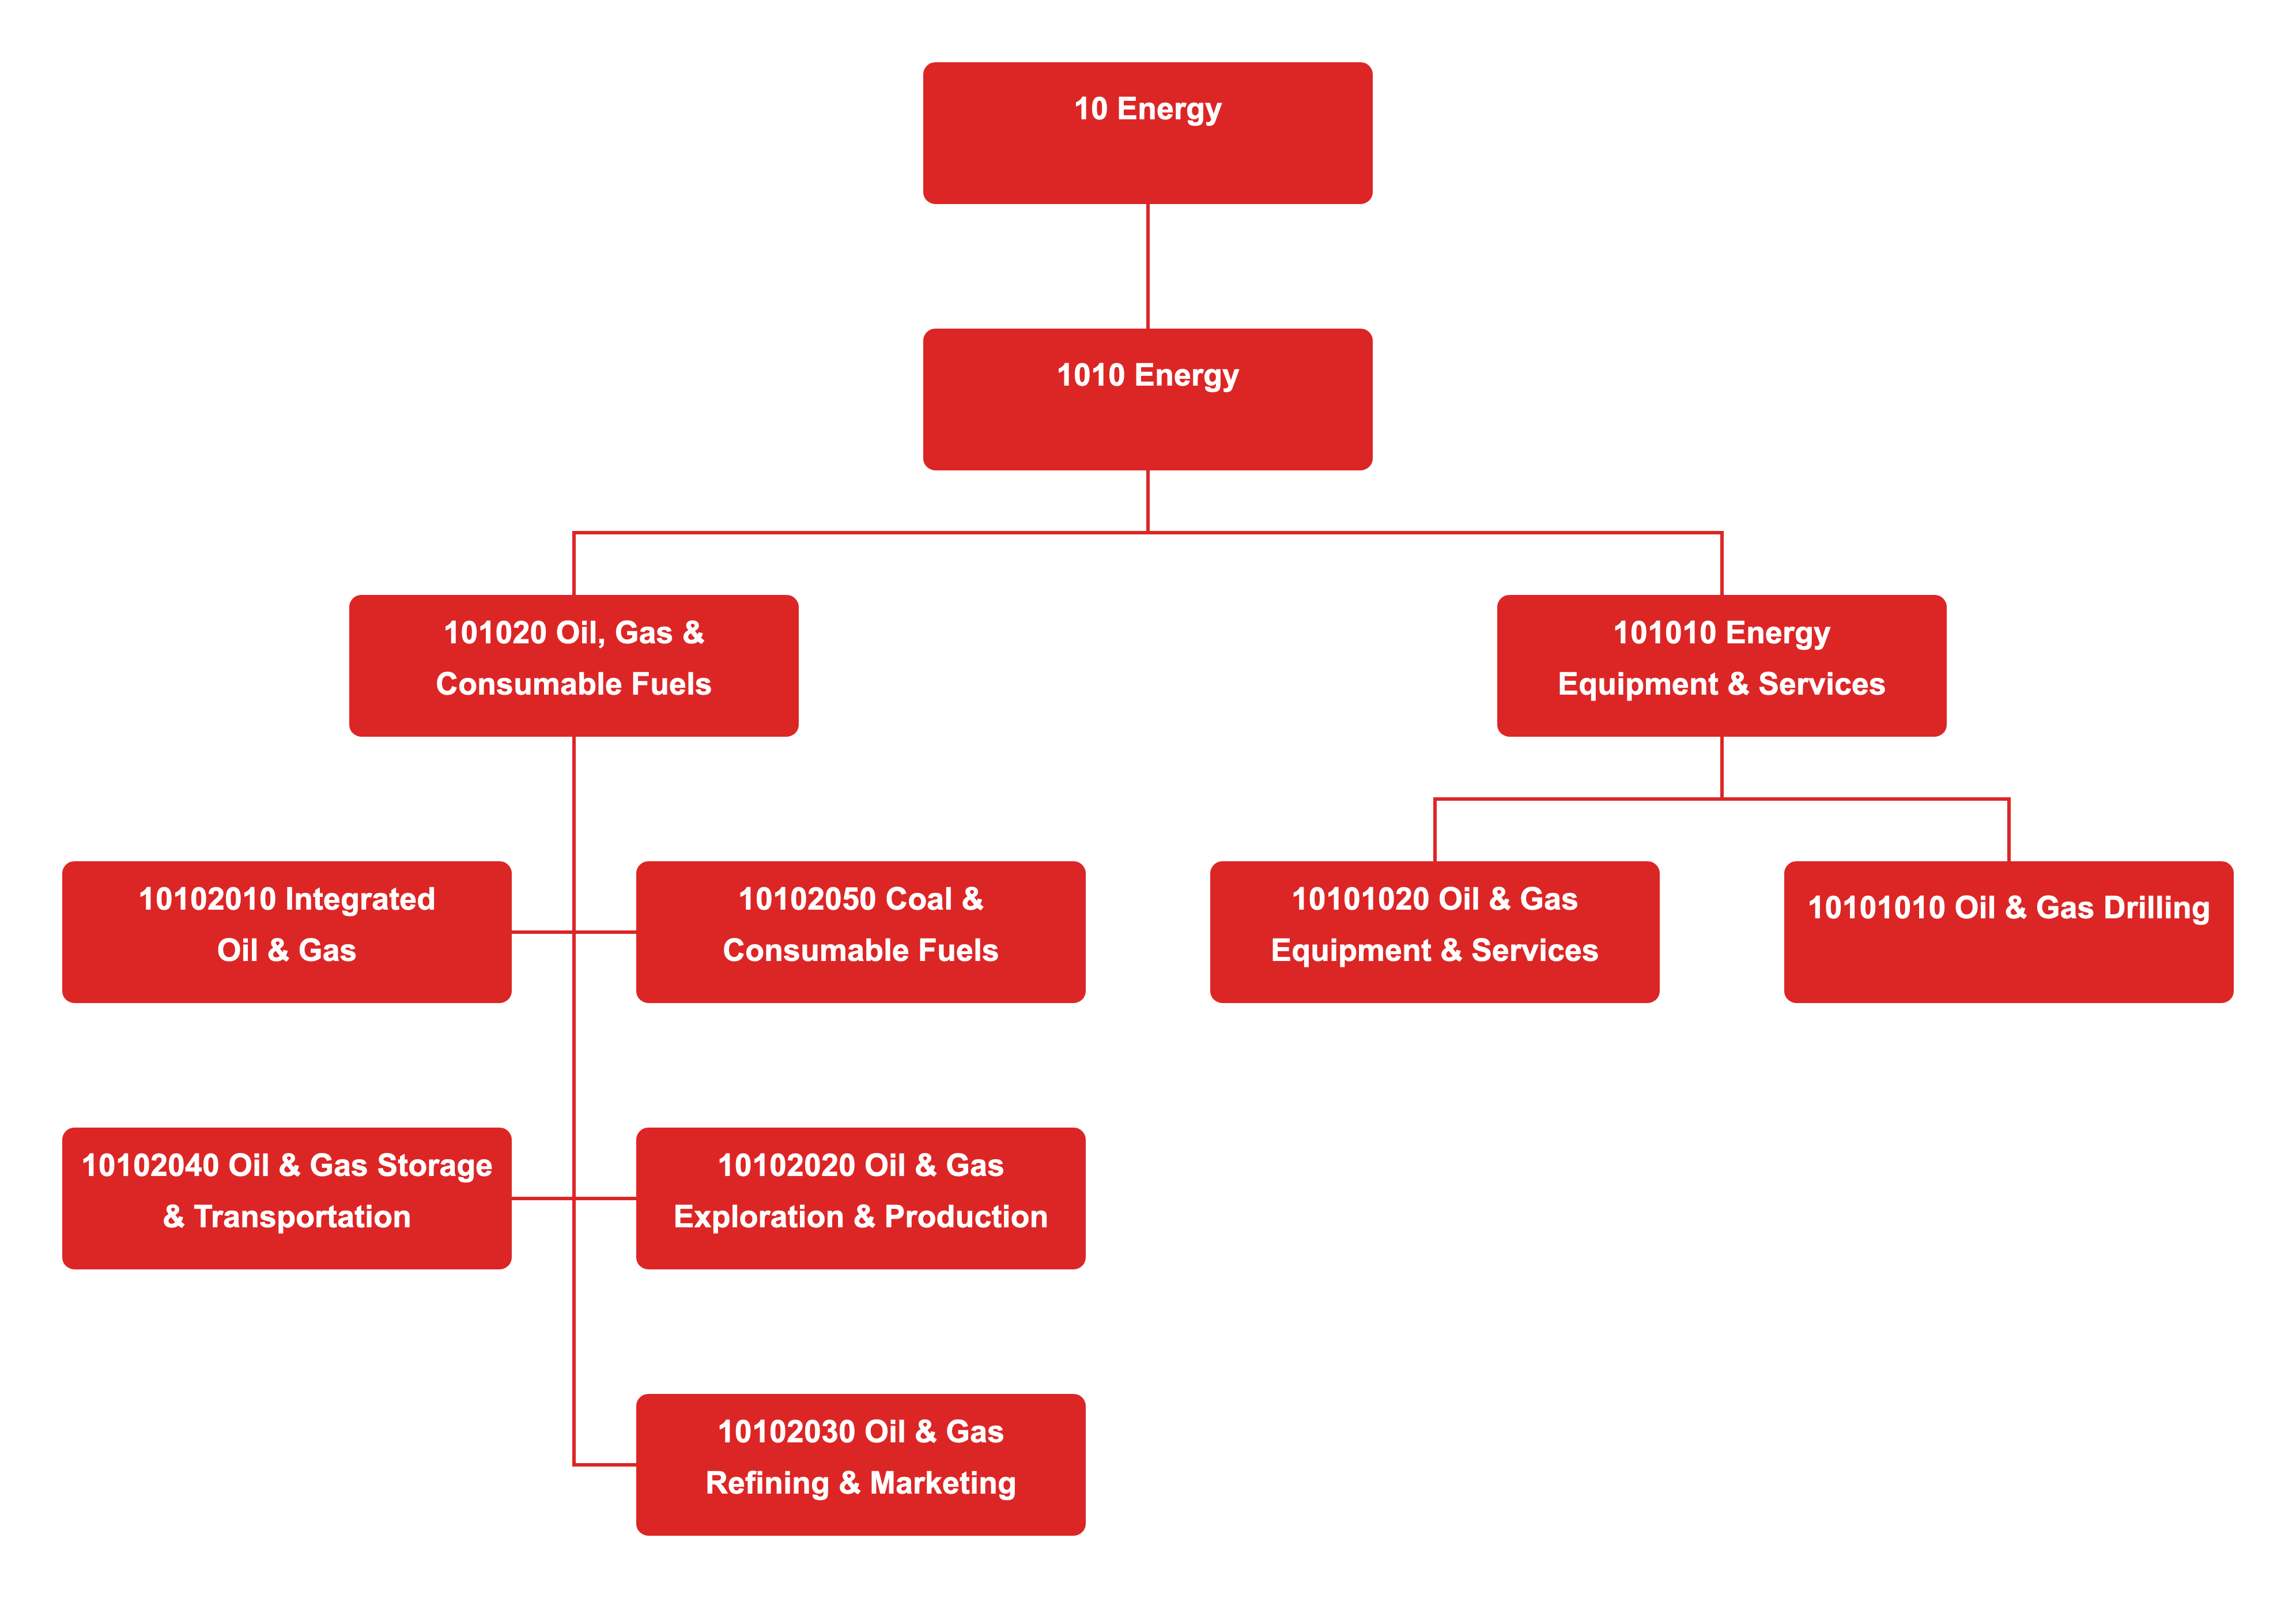 Hierarchy chart of the Energy Sector in the Global Industry Classification Standard (GICS).